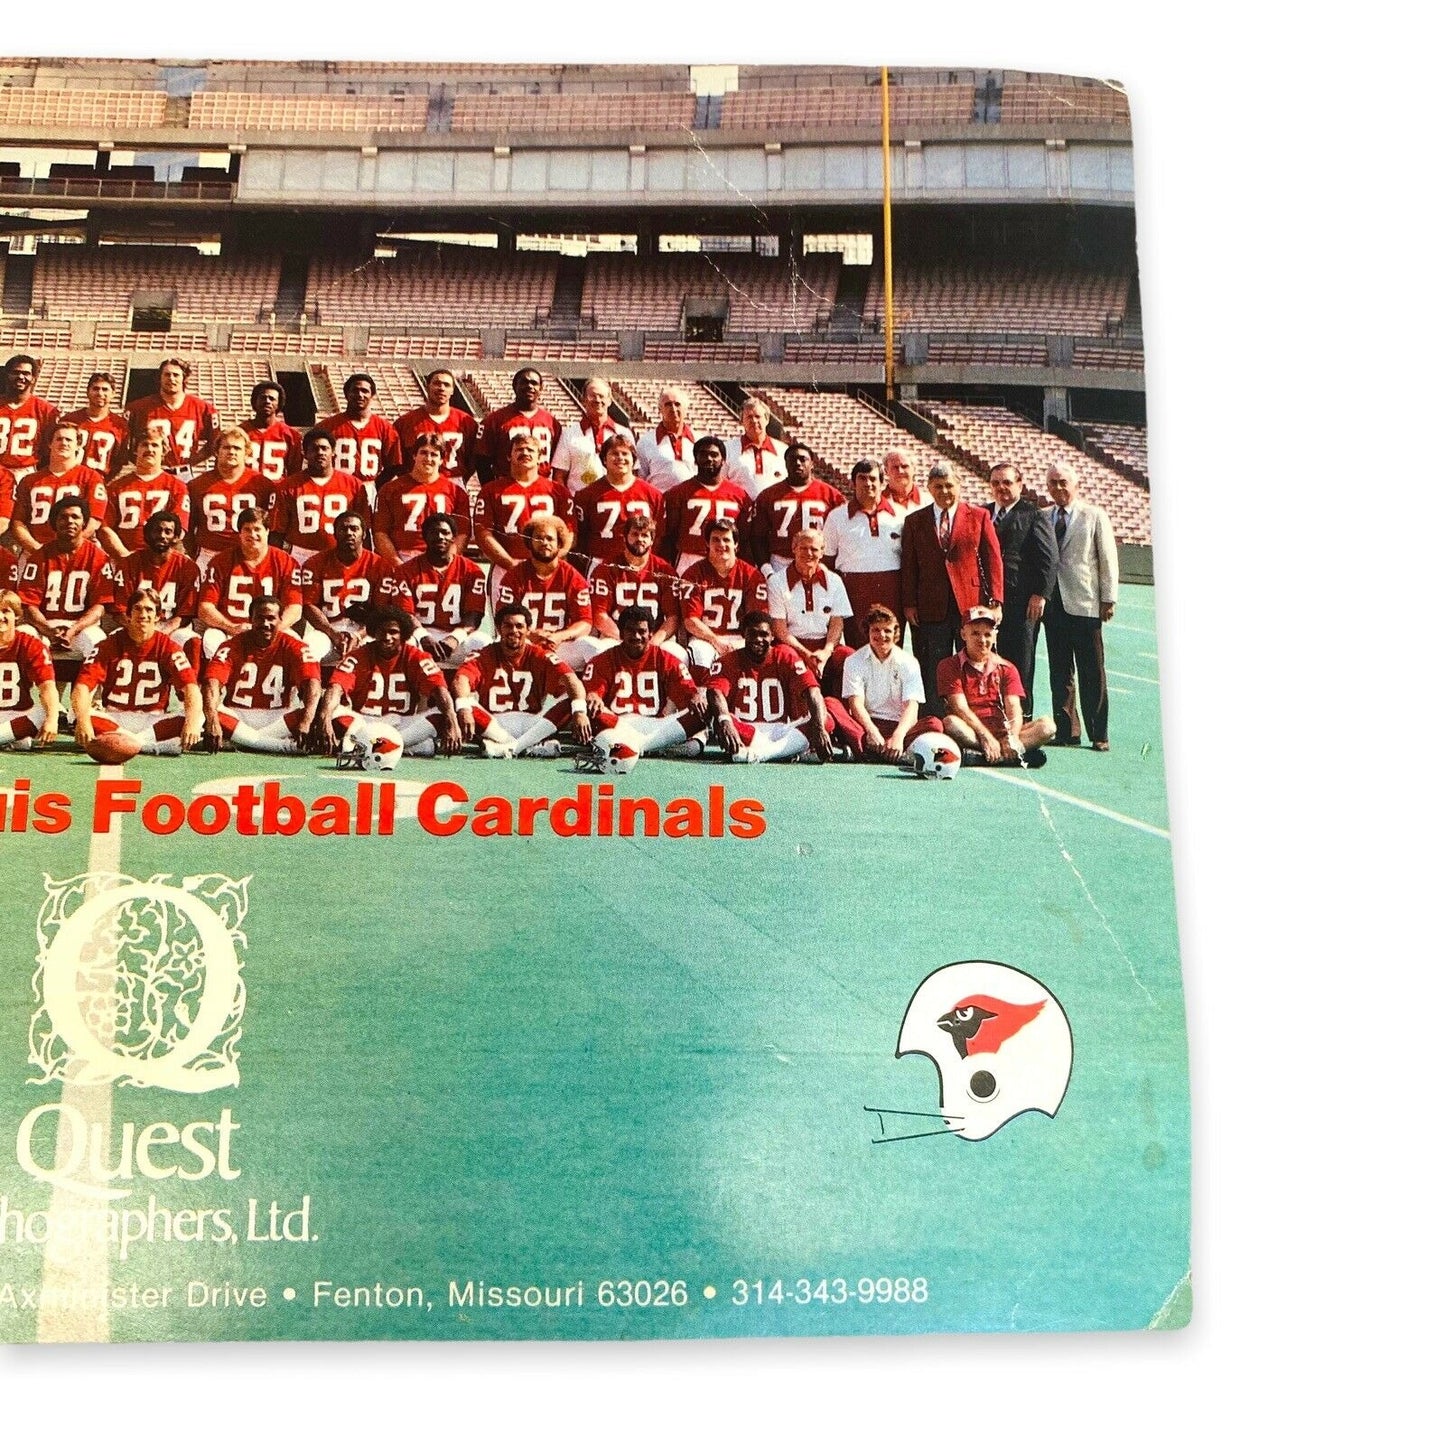 St. Louis Cardinals Football Signed Team Photo 1981 Lithograph '87 & '82 Sched